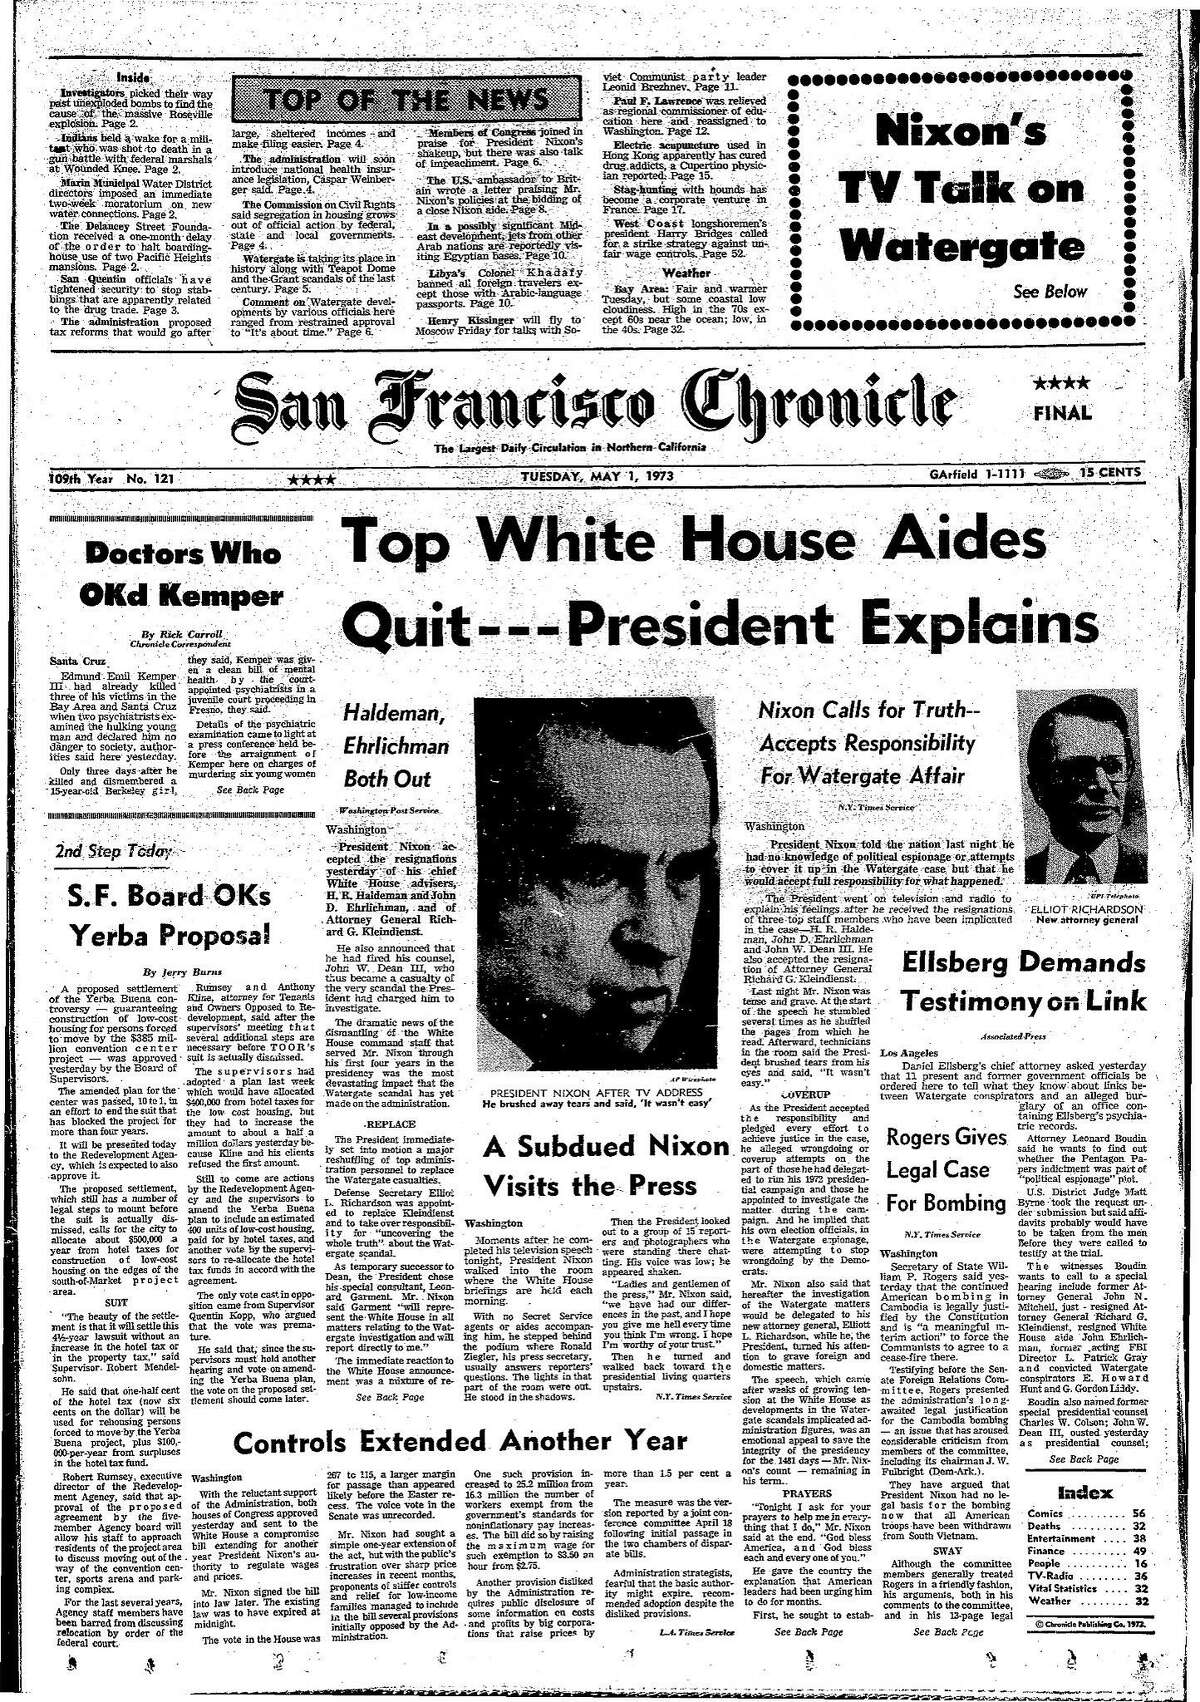 The Chronicle's front page from May 1, 1973, covers the resignation of Nixon's aides during the Watergate scandal.